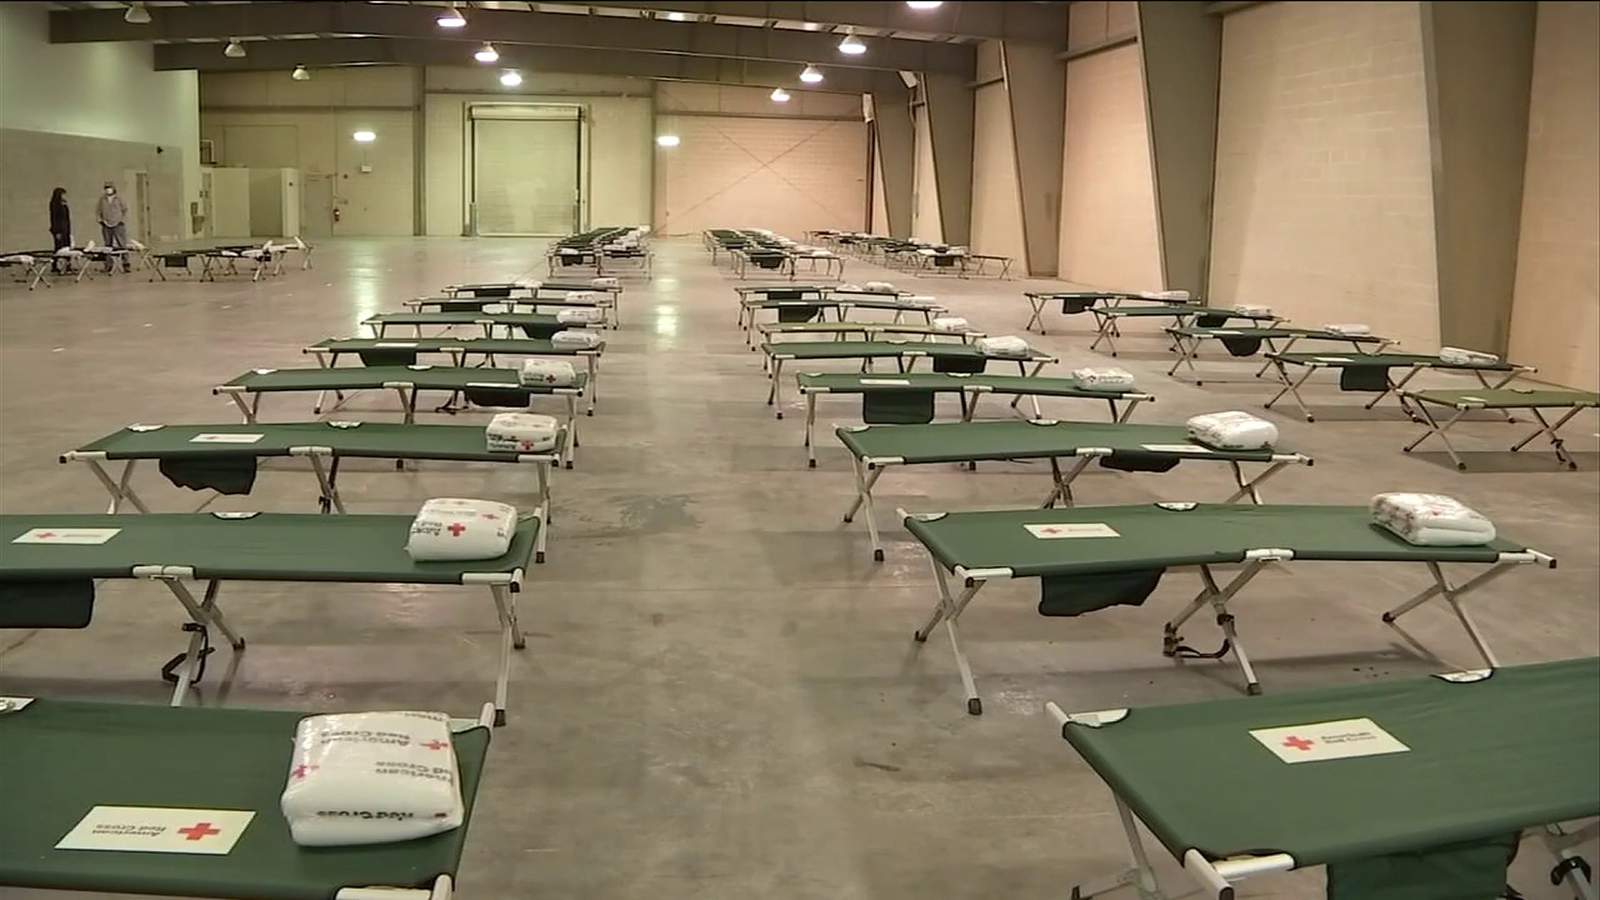 87 of 150 people moved from Jacksonville homeless camp stayed in city’s temporary shelter